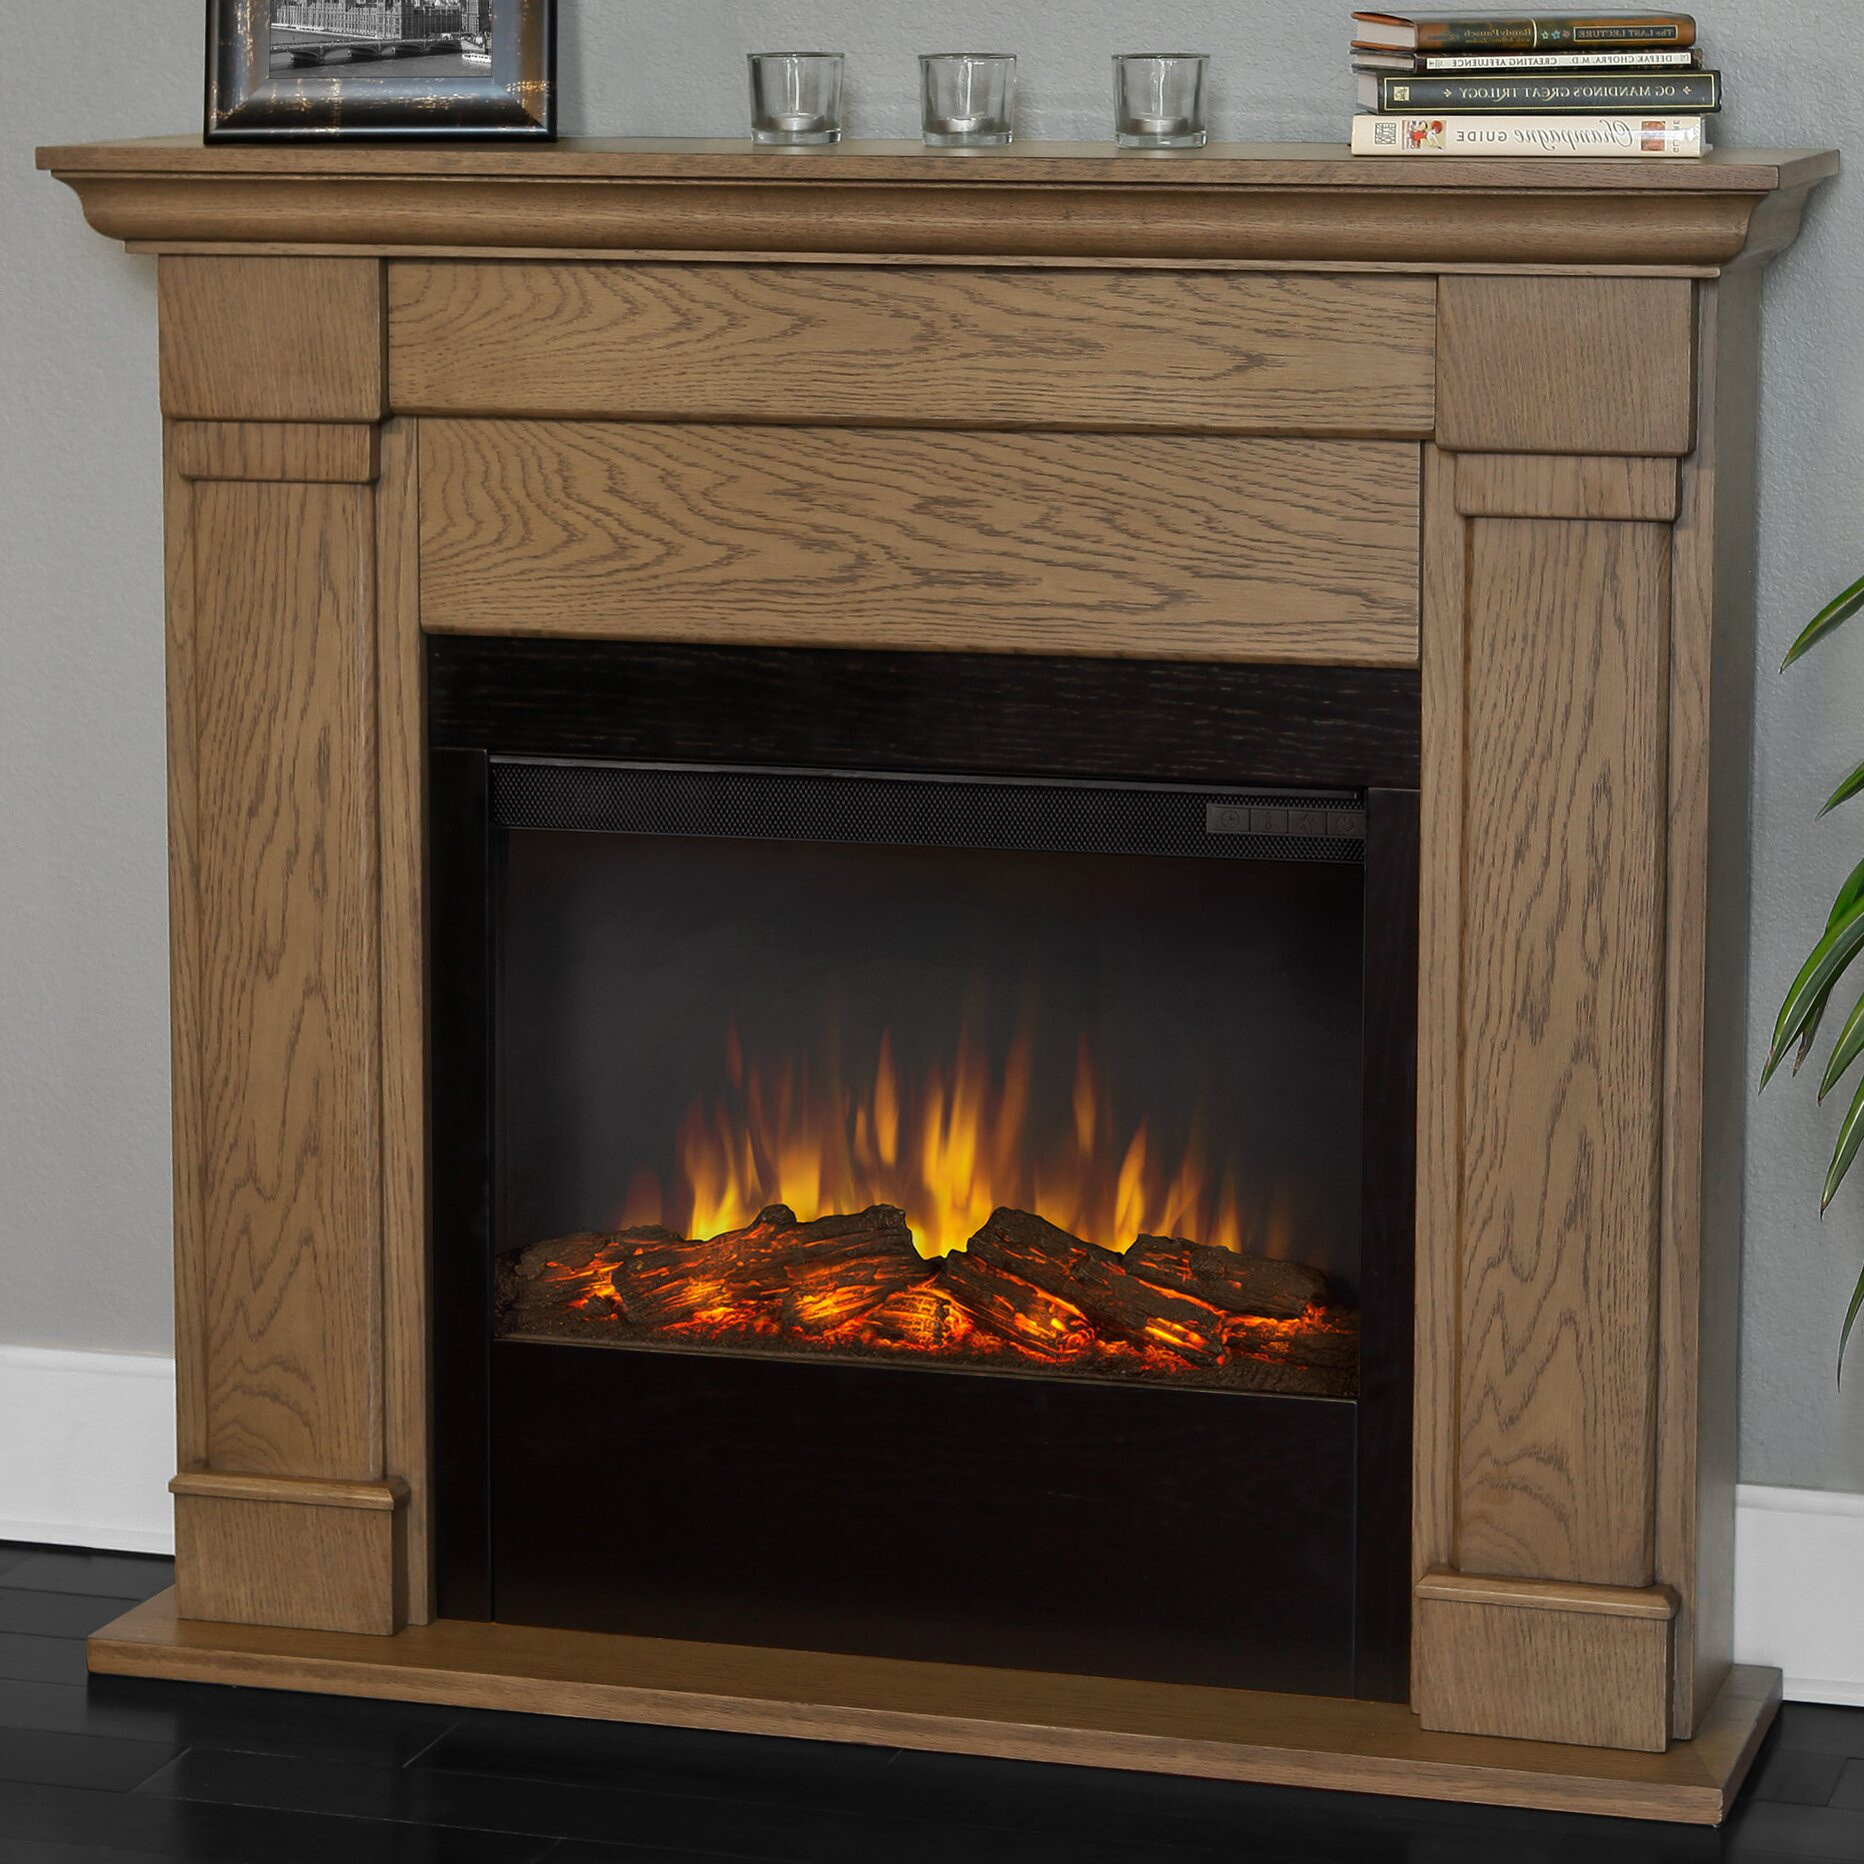 Real Flame Electric Fireplace Reviews
 Real Flame Slim Lowry Wall Mount Electric Fireplace